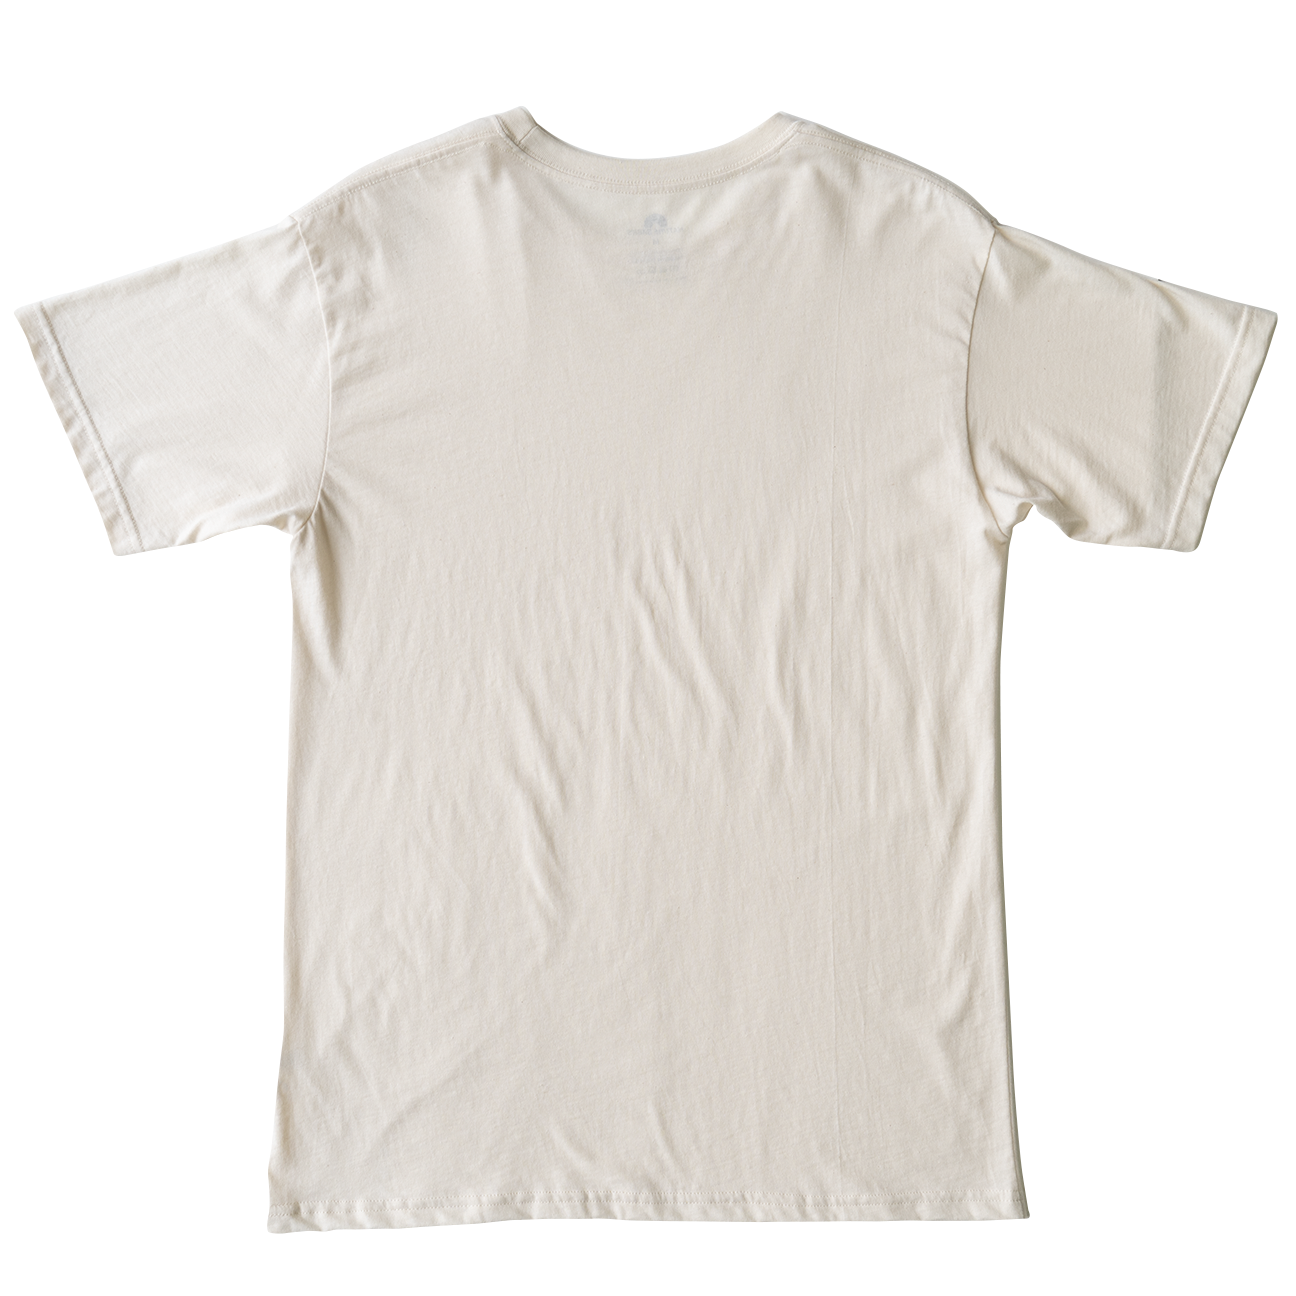 Nature Backs Short Sleeve 100% Organic Cotton T-Shirt | Minimalist Natural Short Sleeve made with Eco-Friendly Fibers Sustainably made in the USA 